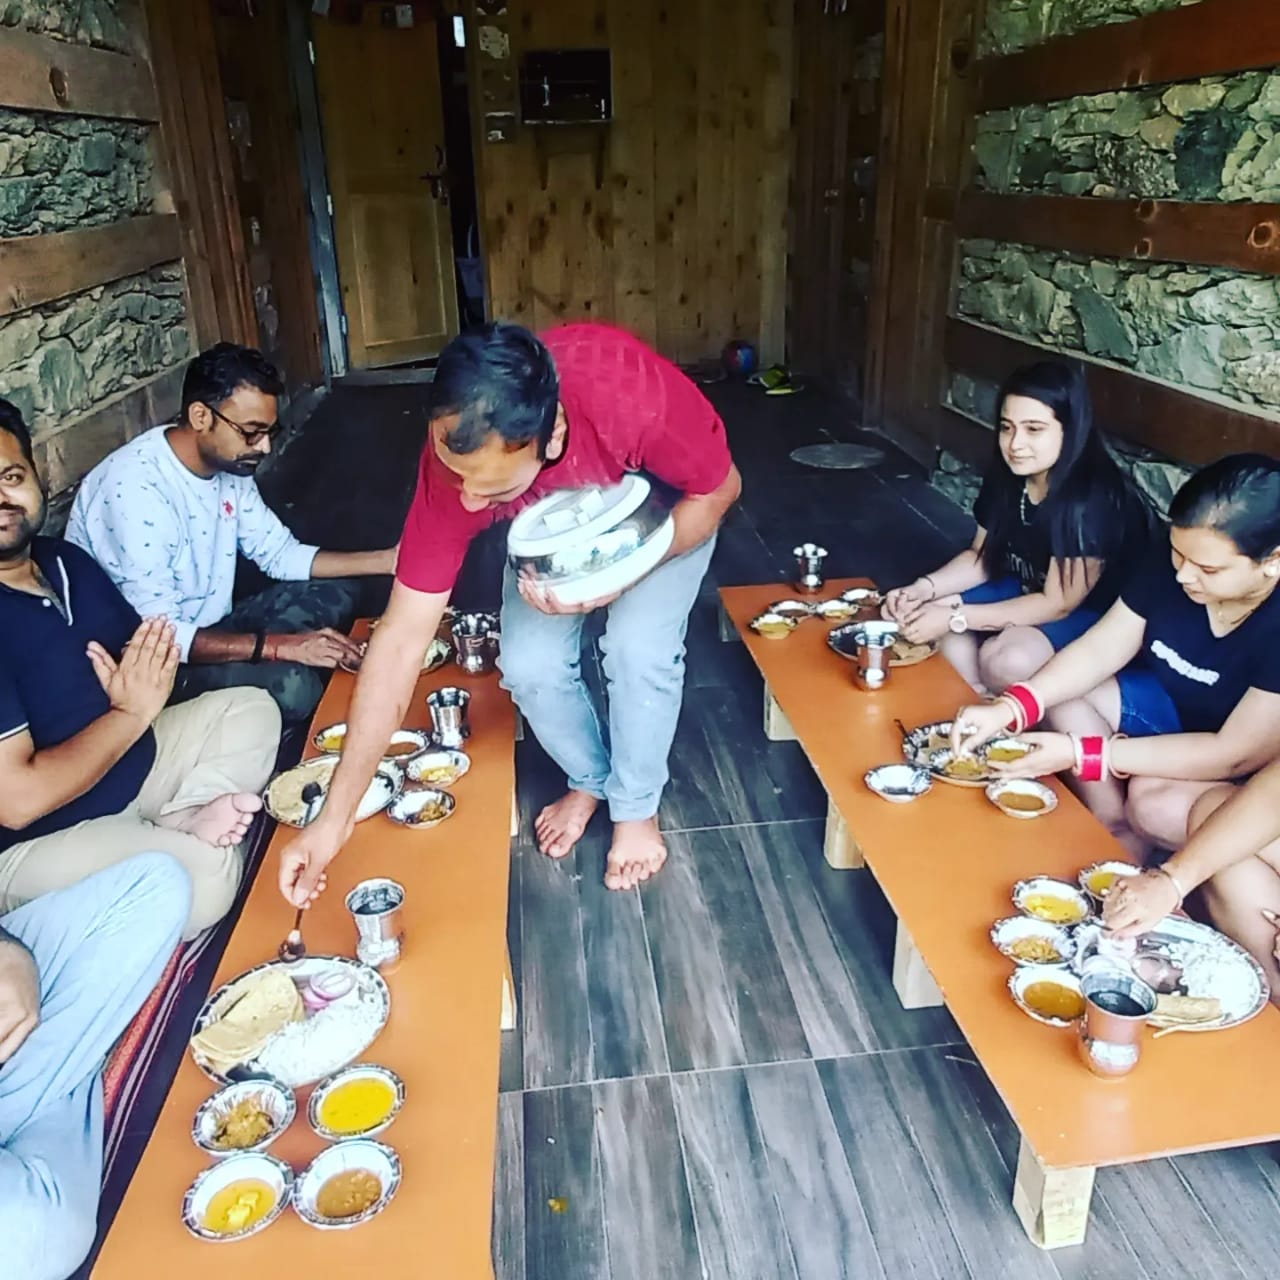 traditional himachali food being served at eco friendly homestay in sainj valley 